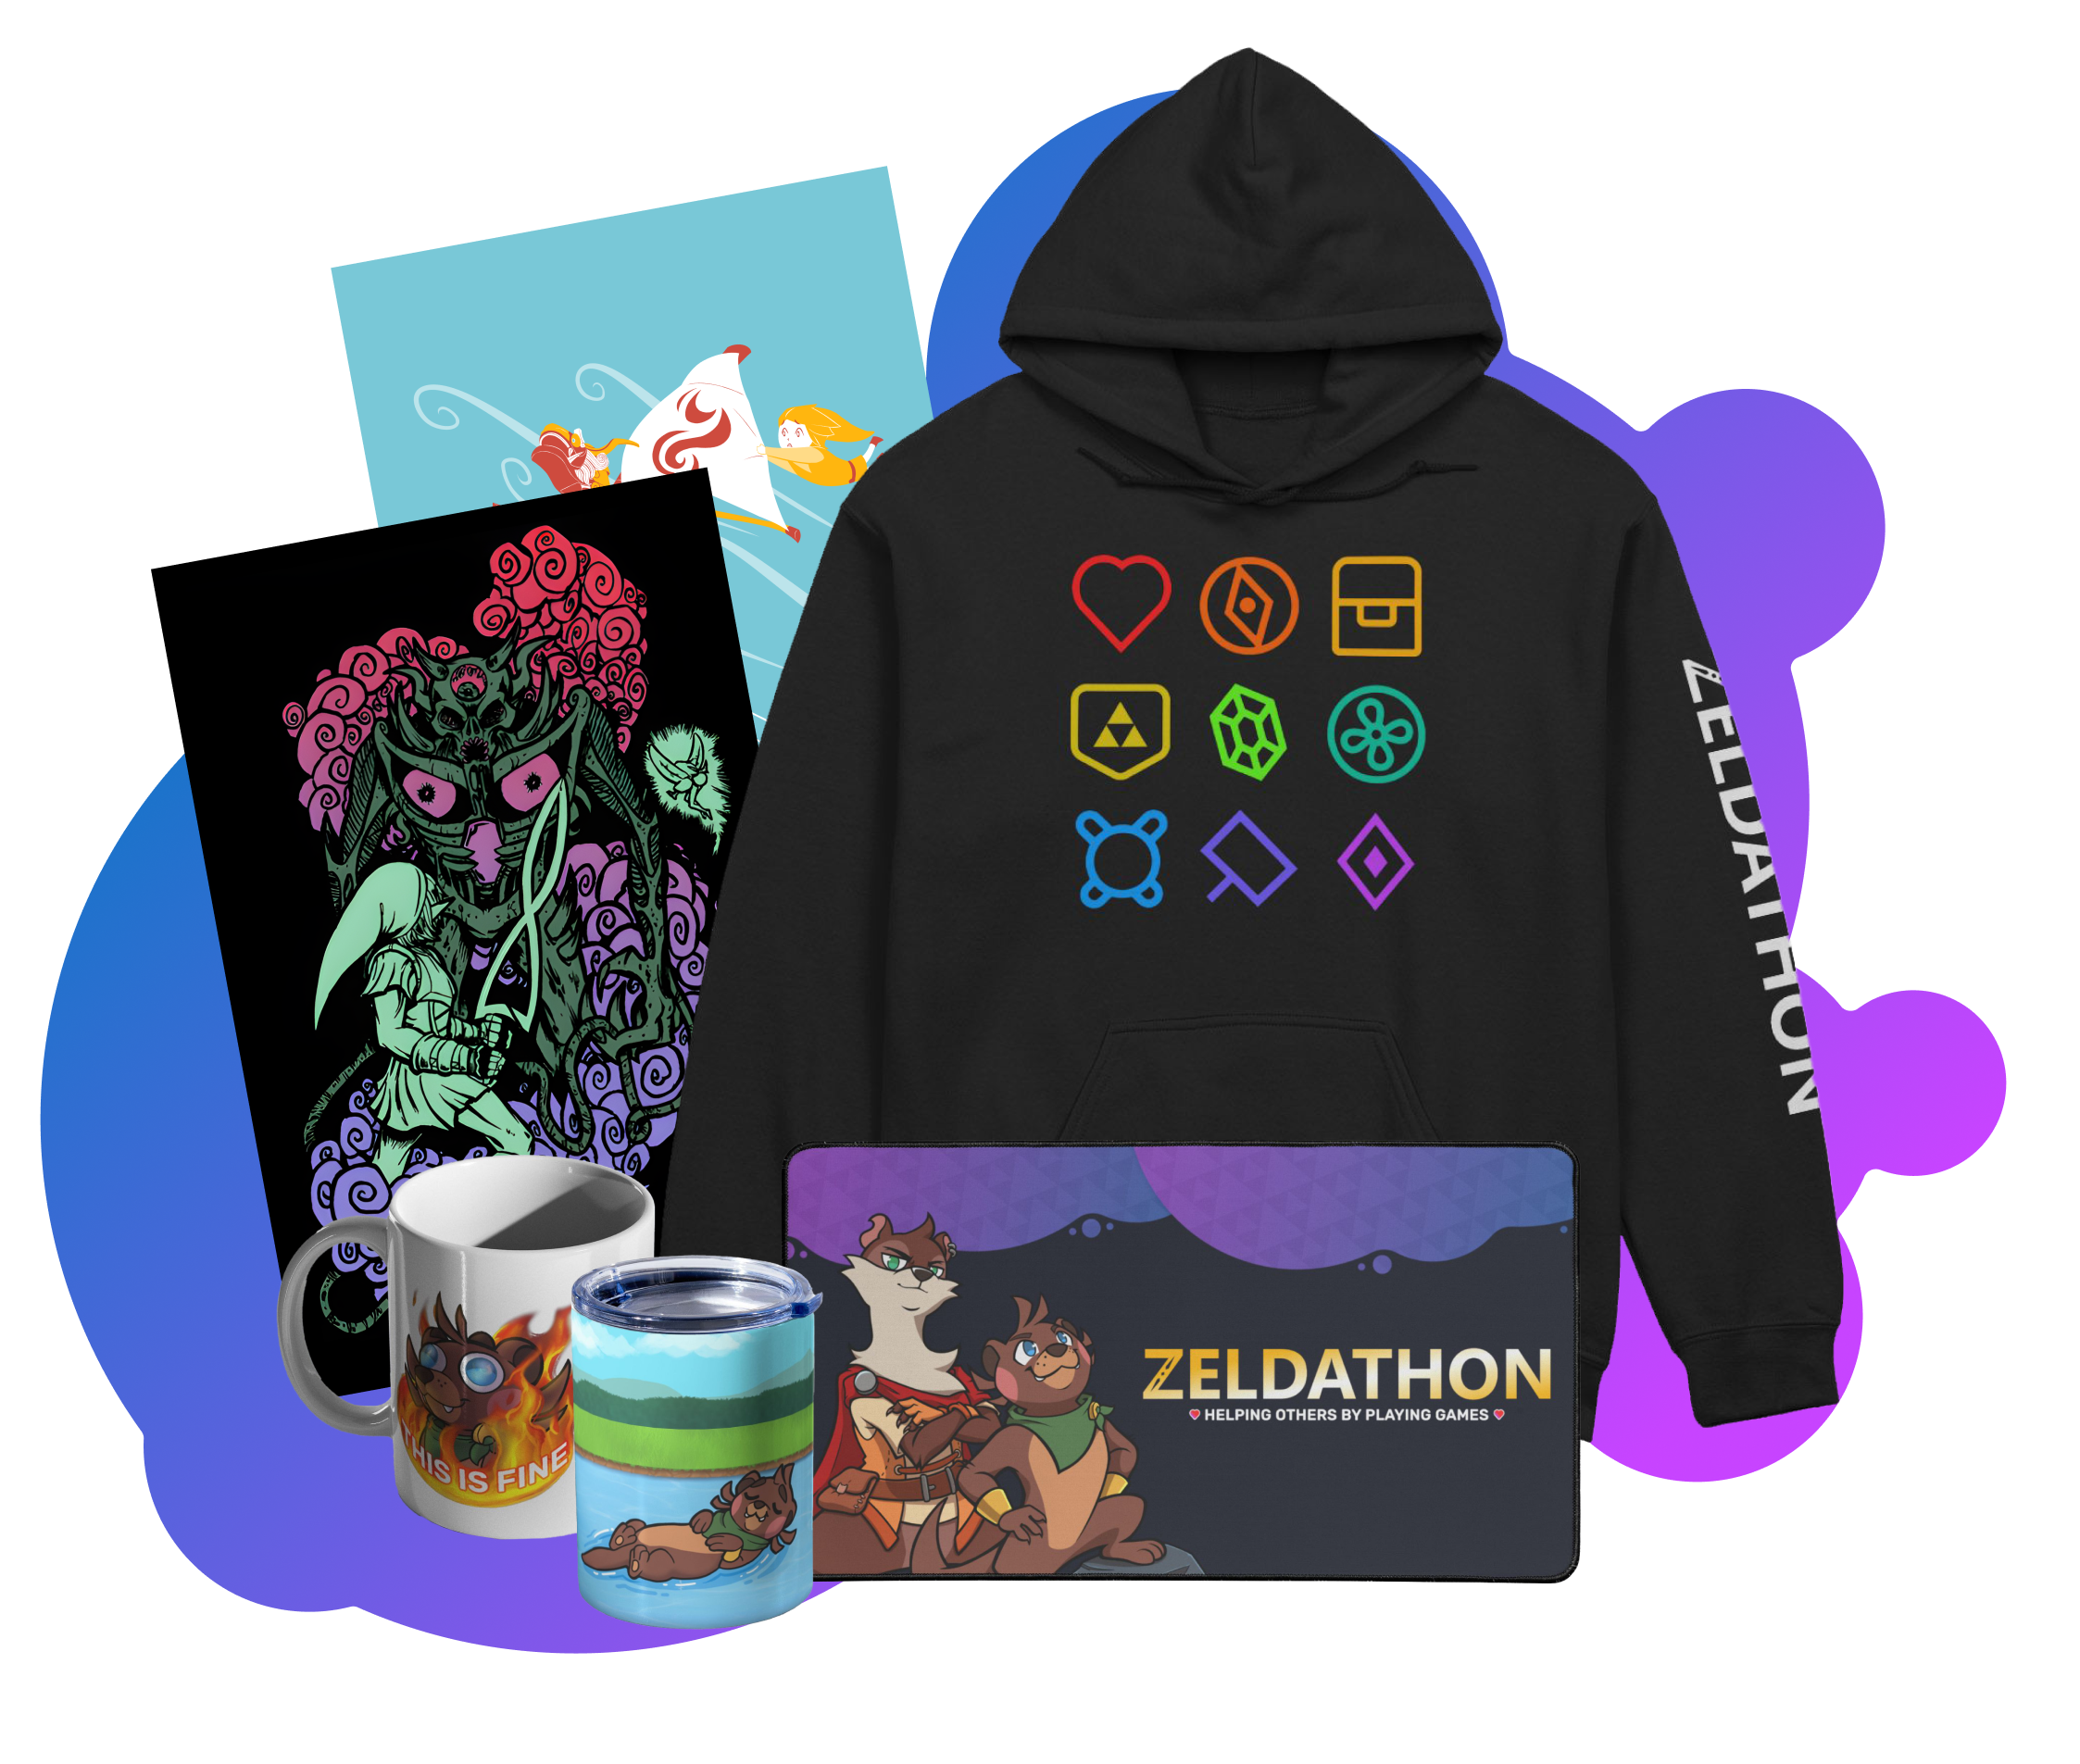 Merch offerings, hoodies, mousepads, mugs, and posters